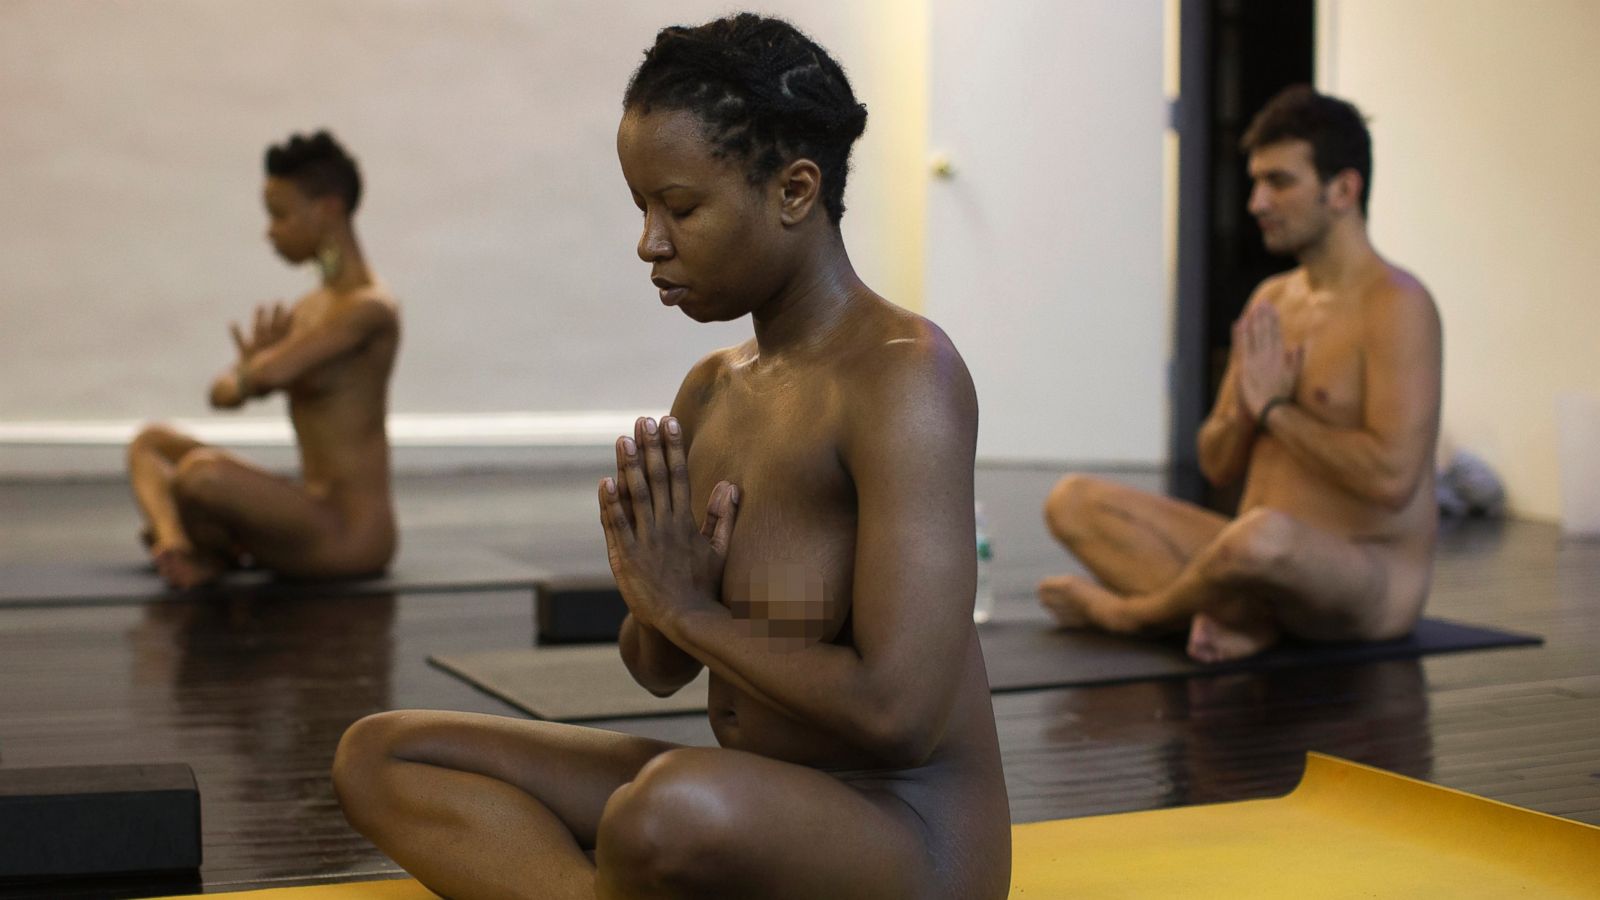 Naked Yoga Class: No Clothes Allowed - ABC News